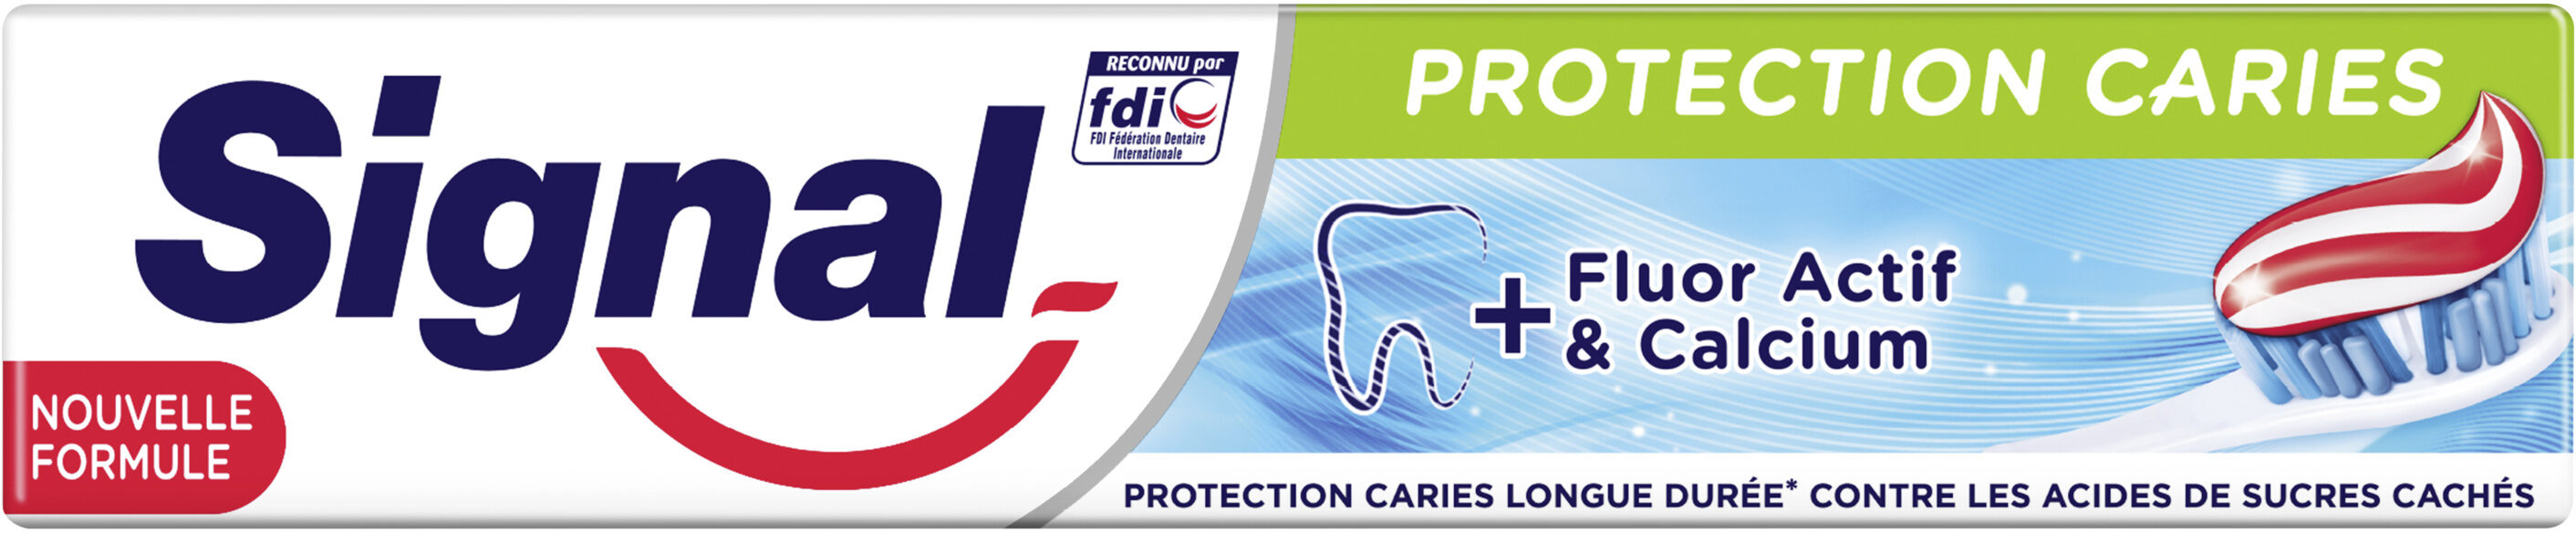 Signal Dentifrice Protection Caries 75ml - Produit - fr